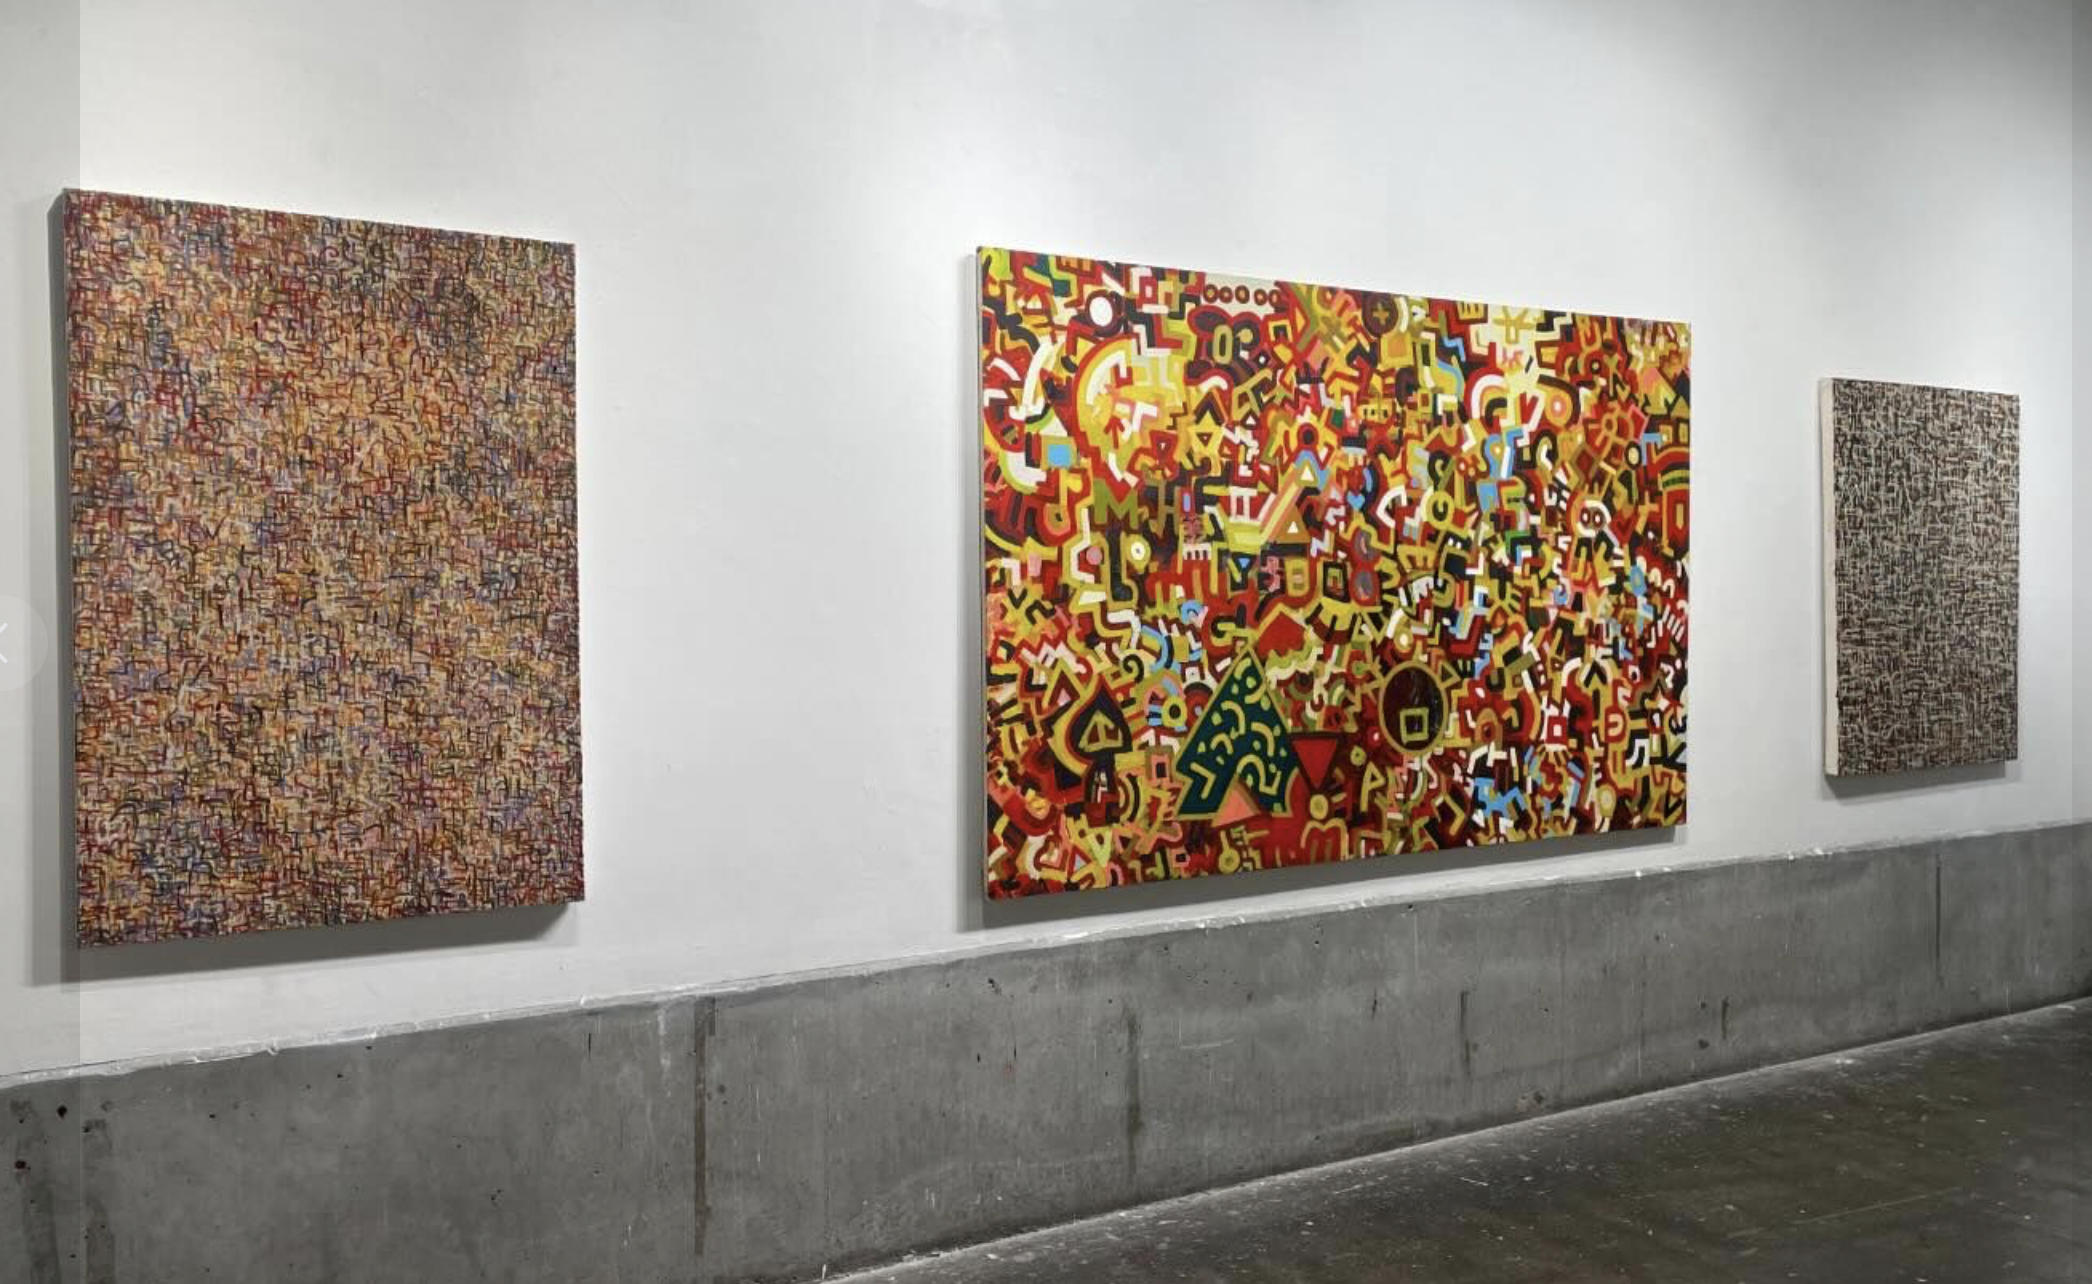 The image is a photo of an art gallery wall. The wall displays three abstract paintings in a row. The painting to the left is a densely packed mosaic of small, colorful shapes and lines creating a textured, intricate pattern. The middle painting is larger and features a vibrant chaotic mix of bright colors and abstract shapes, including reds, yellows and blues. The painting to the right is similar to the one on the left, with a dense arrangement of small, colorful shapes and lines. All paintings are by Matthew Simpson.